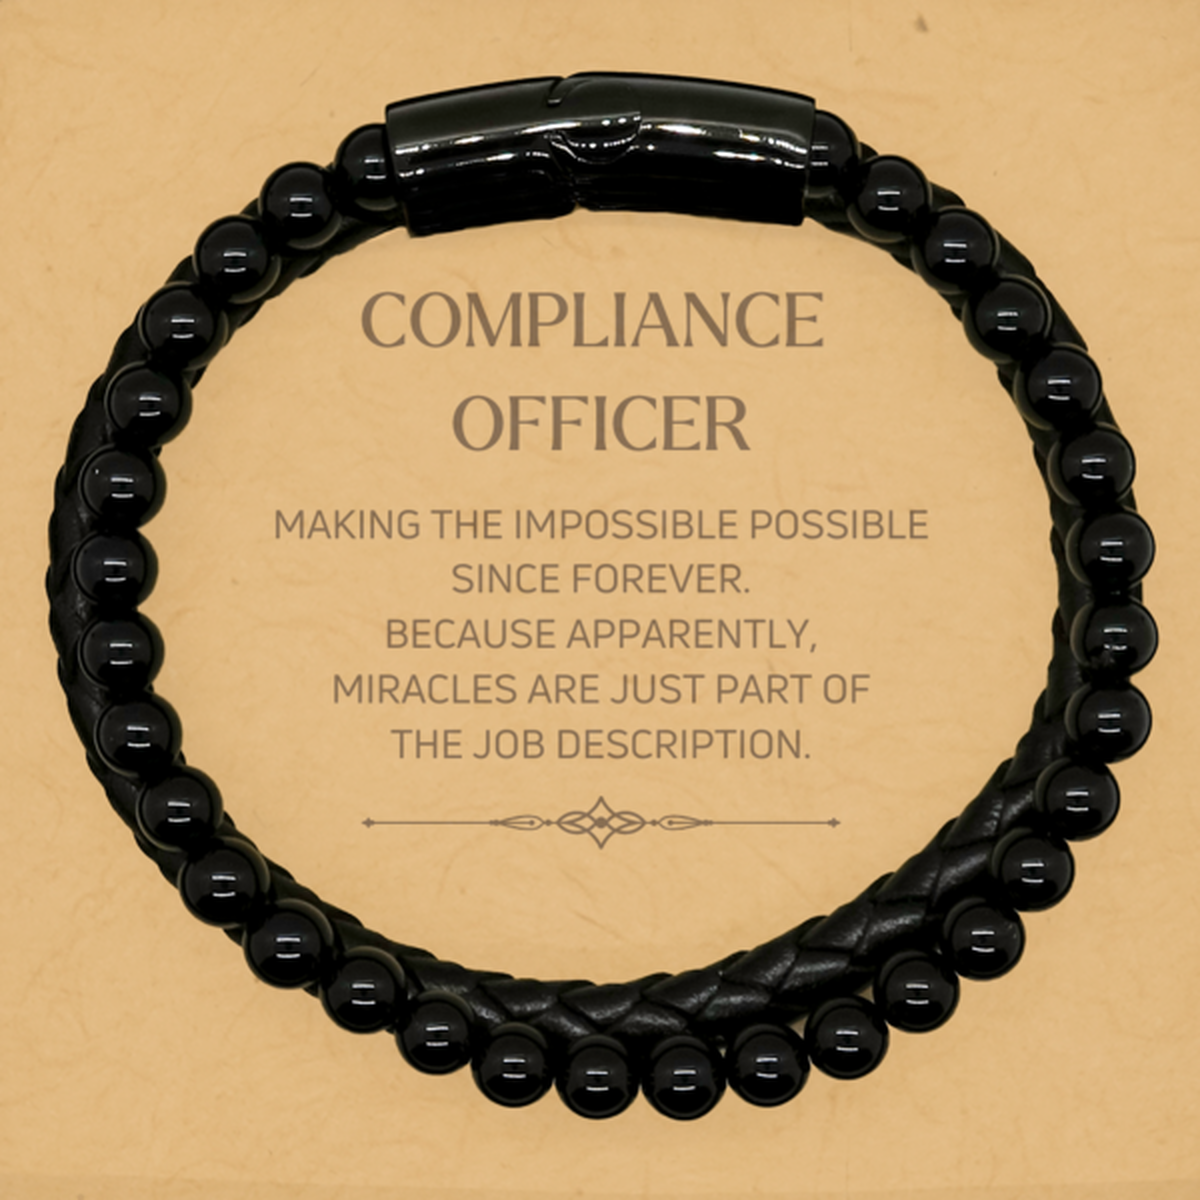 Funny Compliance Officer Gifts, Miracles are just part of the job description, Inspirational Birthday Stone Leather Bracelets For Compliance Officer, Men, Women, Coworkers, Friends, Boss